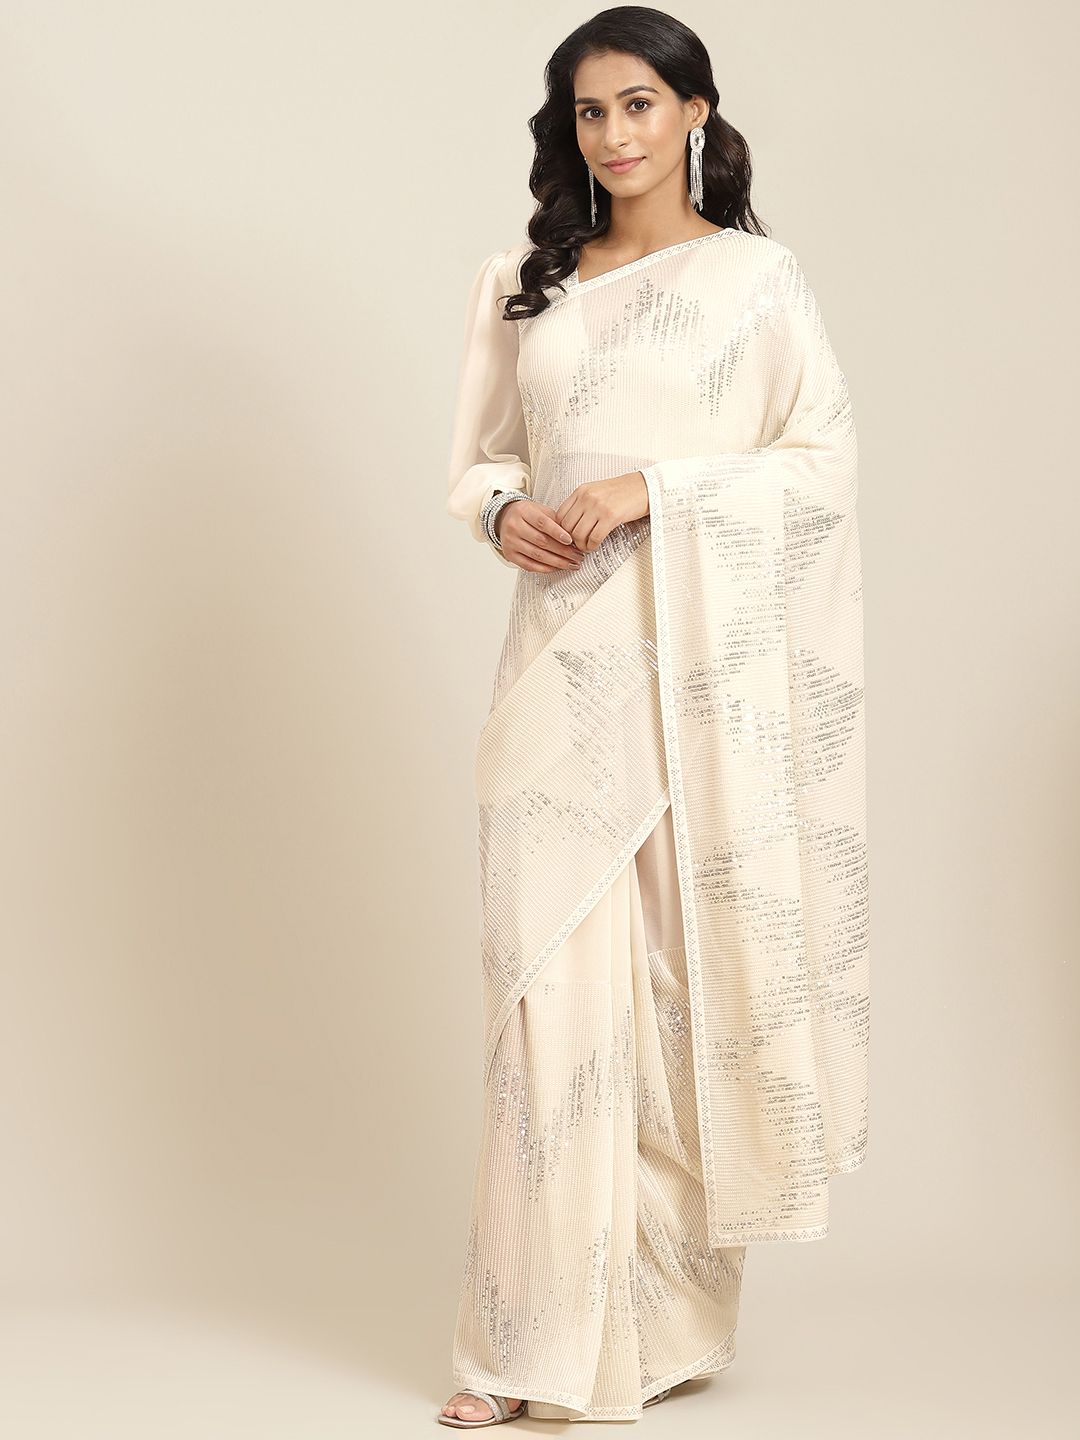 Readiprint Fashions White Sequinned Pure Georgette Saree Price in India